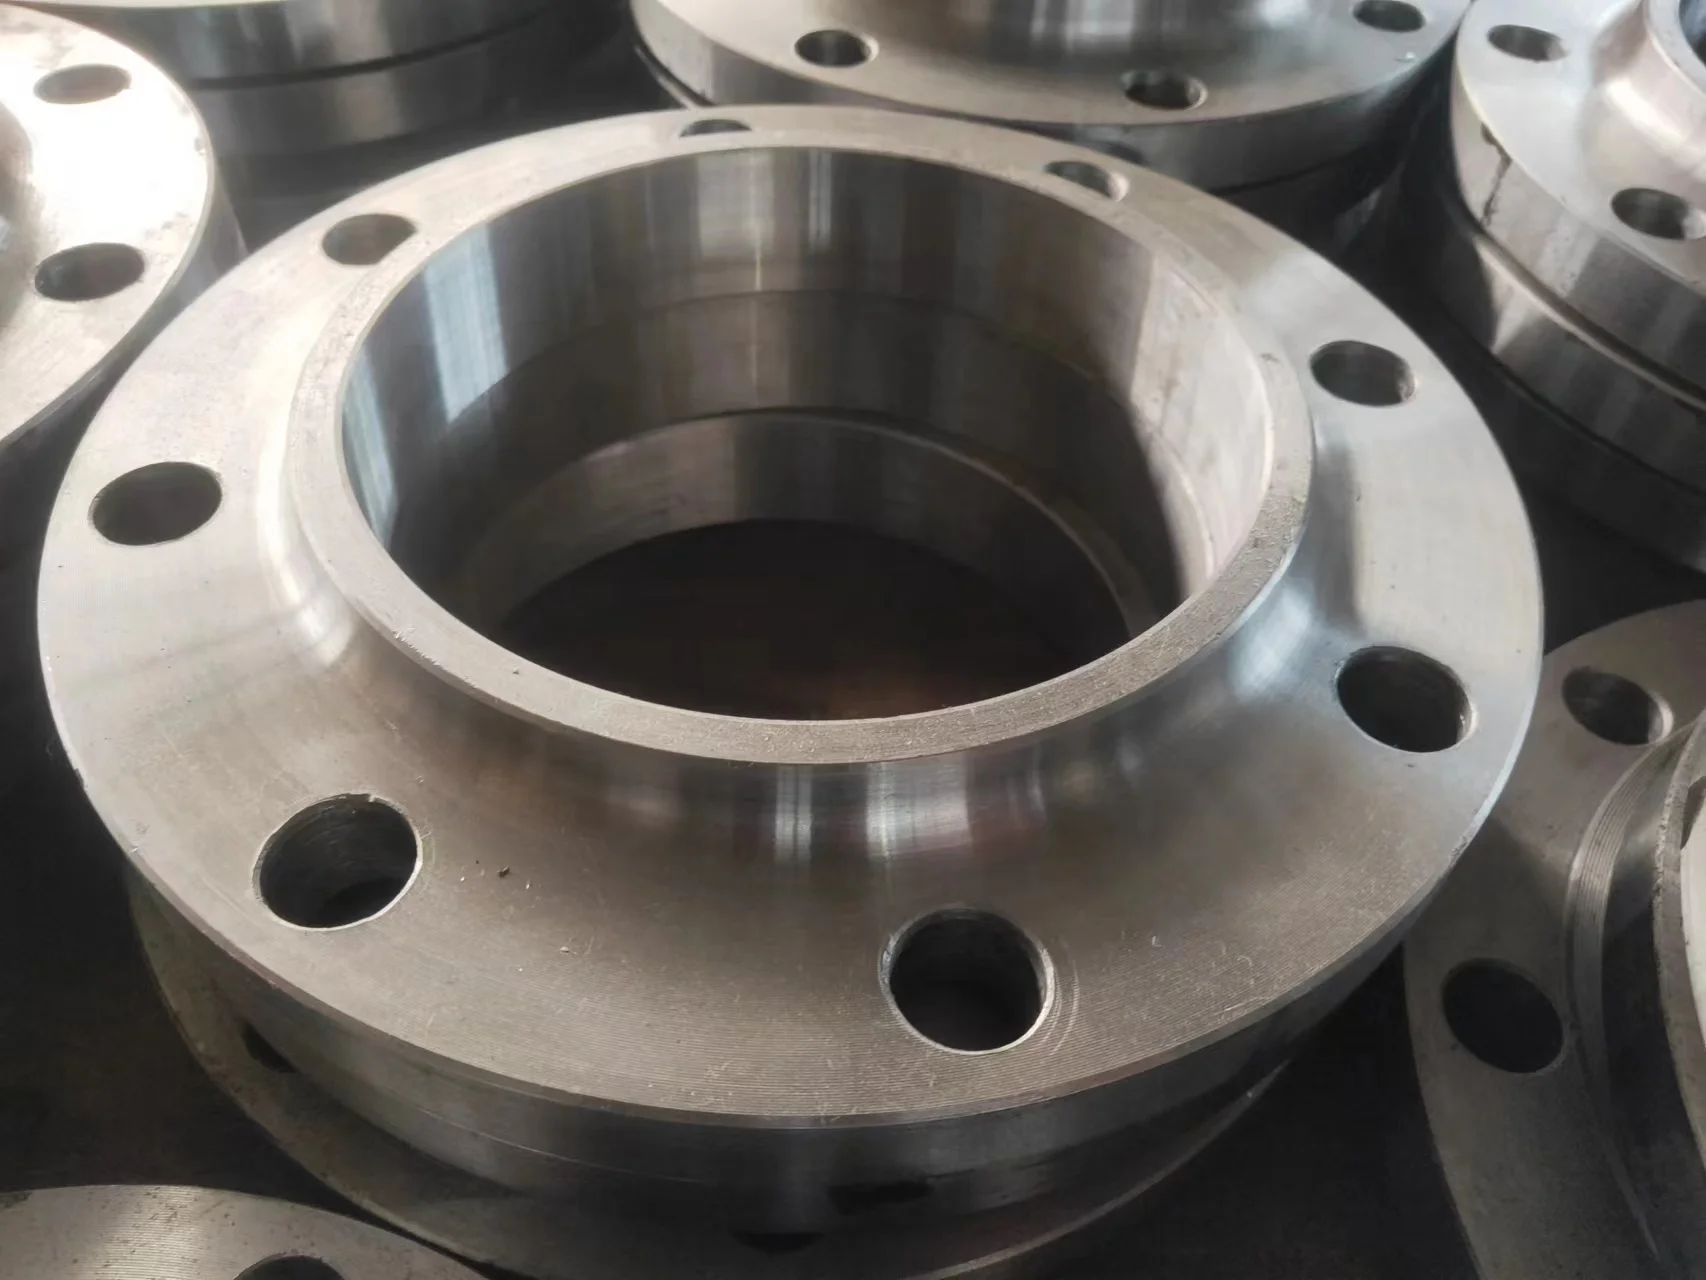 Pipe Fittings flange Raised Face Weld Neck Flange Drawing A105 Welding Neck  Sorf Wnrf Blind Flanges